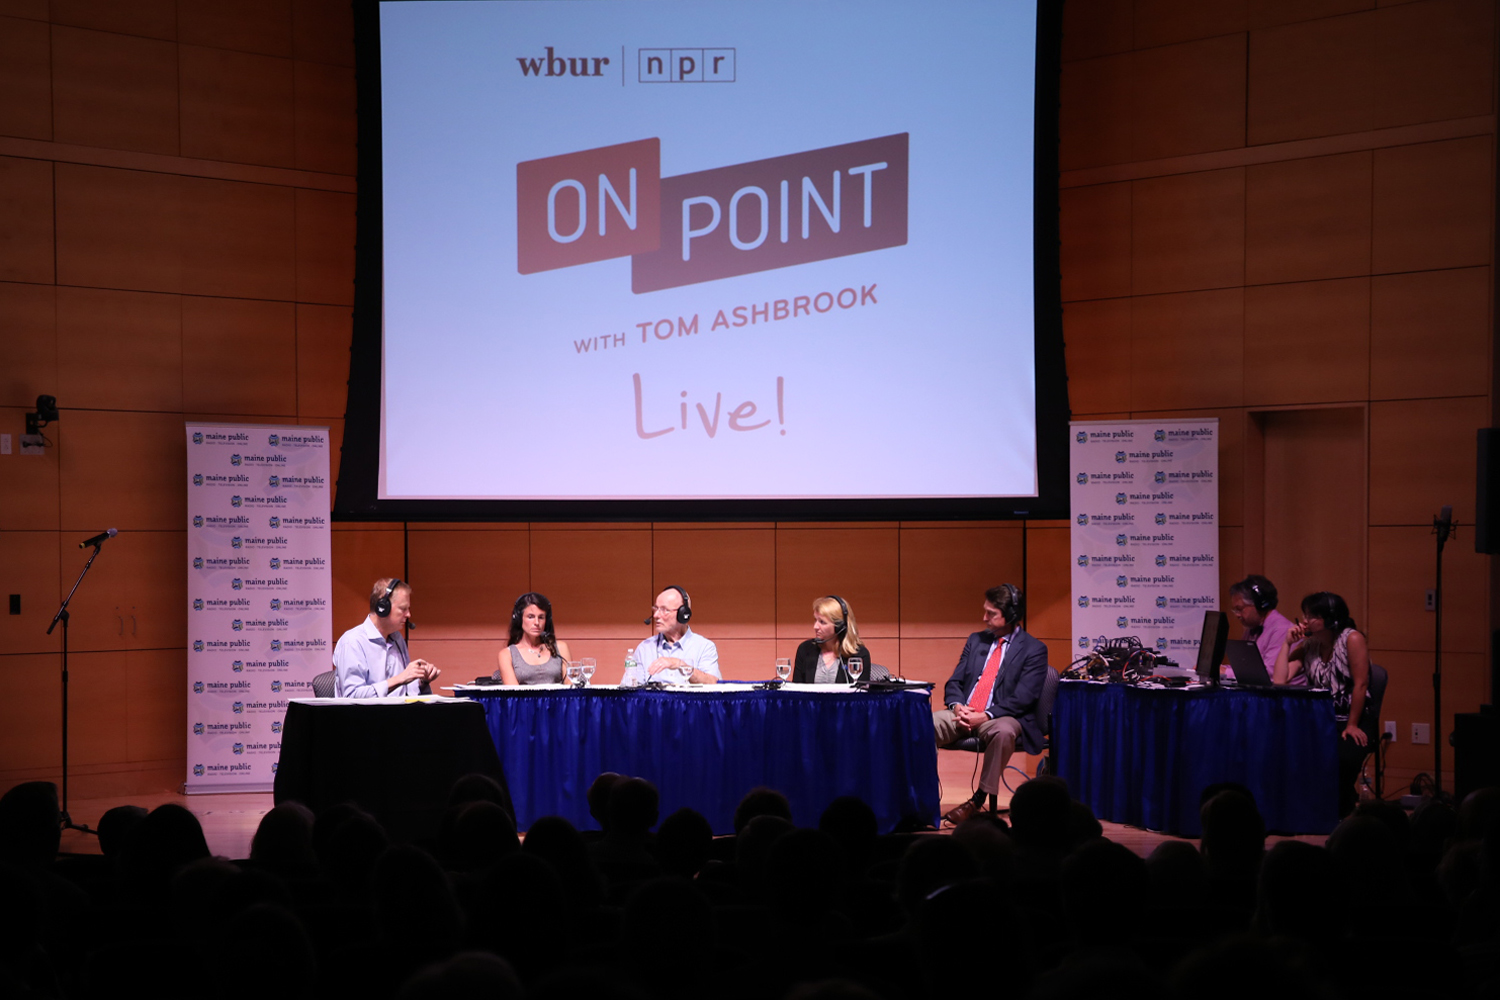 Tom Ashbrook moderates a discussion at the #OnPointLive show in Portland, Maine. (Brian Bechard/Maine Public)